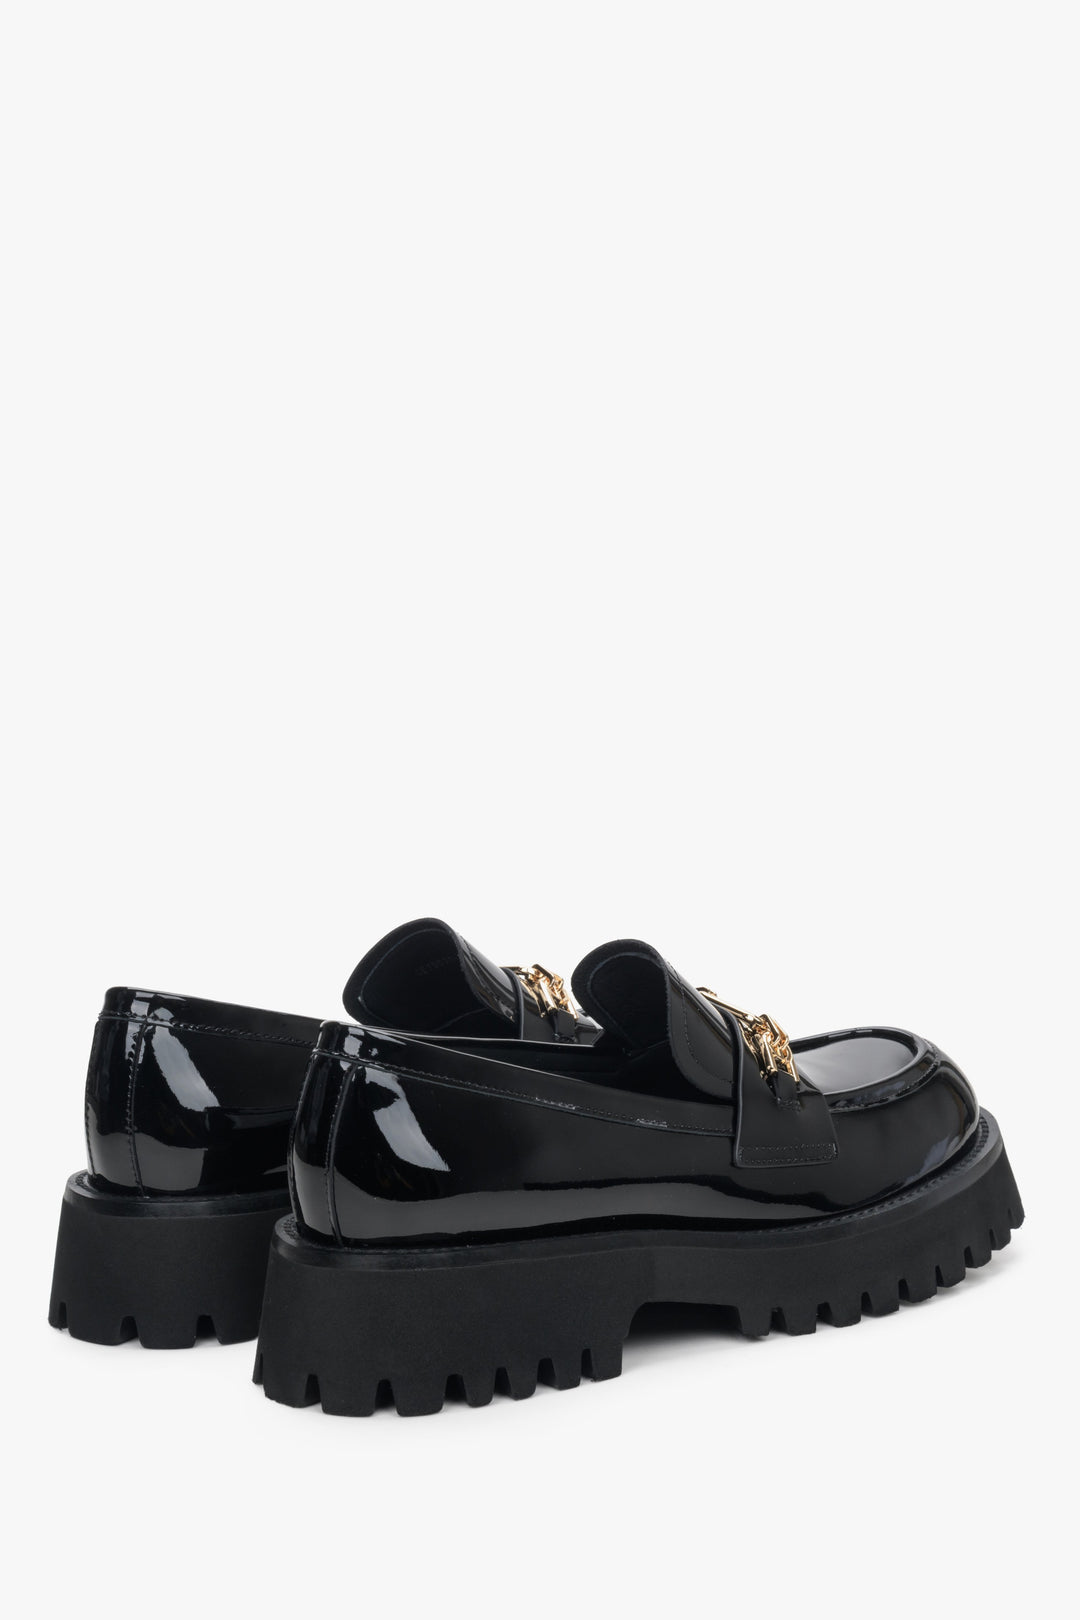 Women's black leather moccasins by Estro with a gold buckle - close-up on the heel.